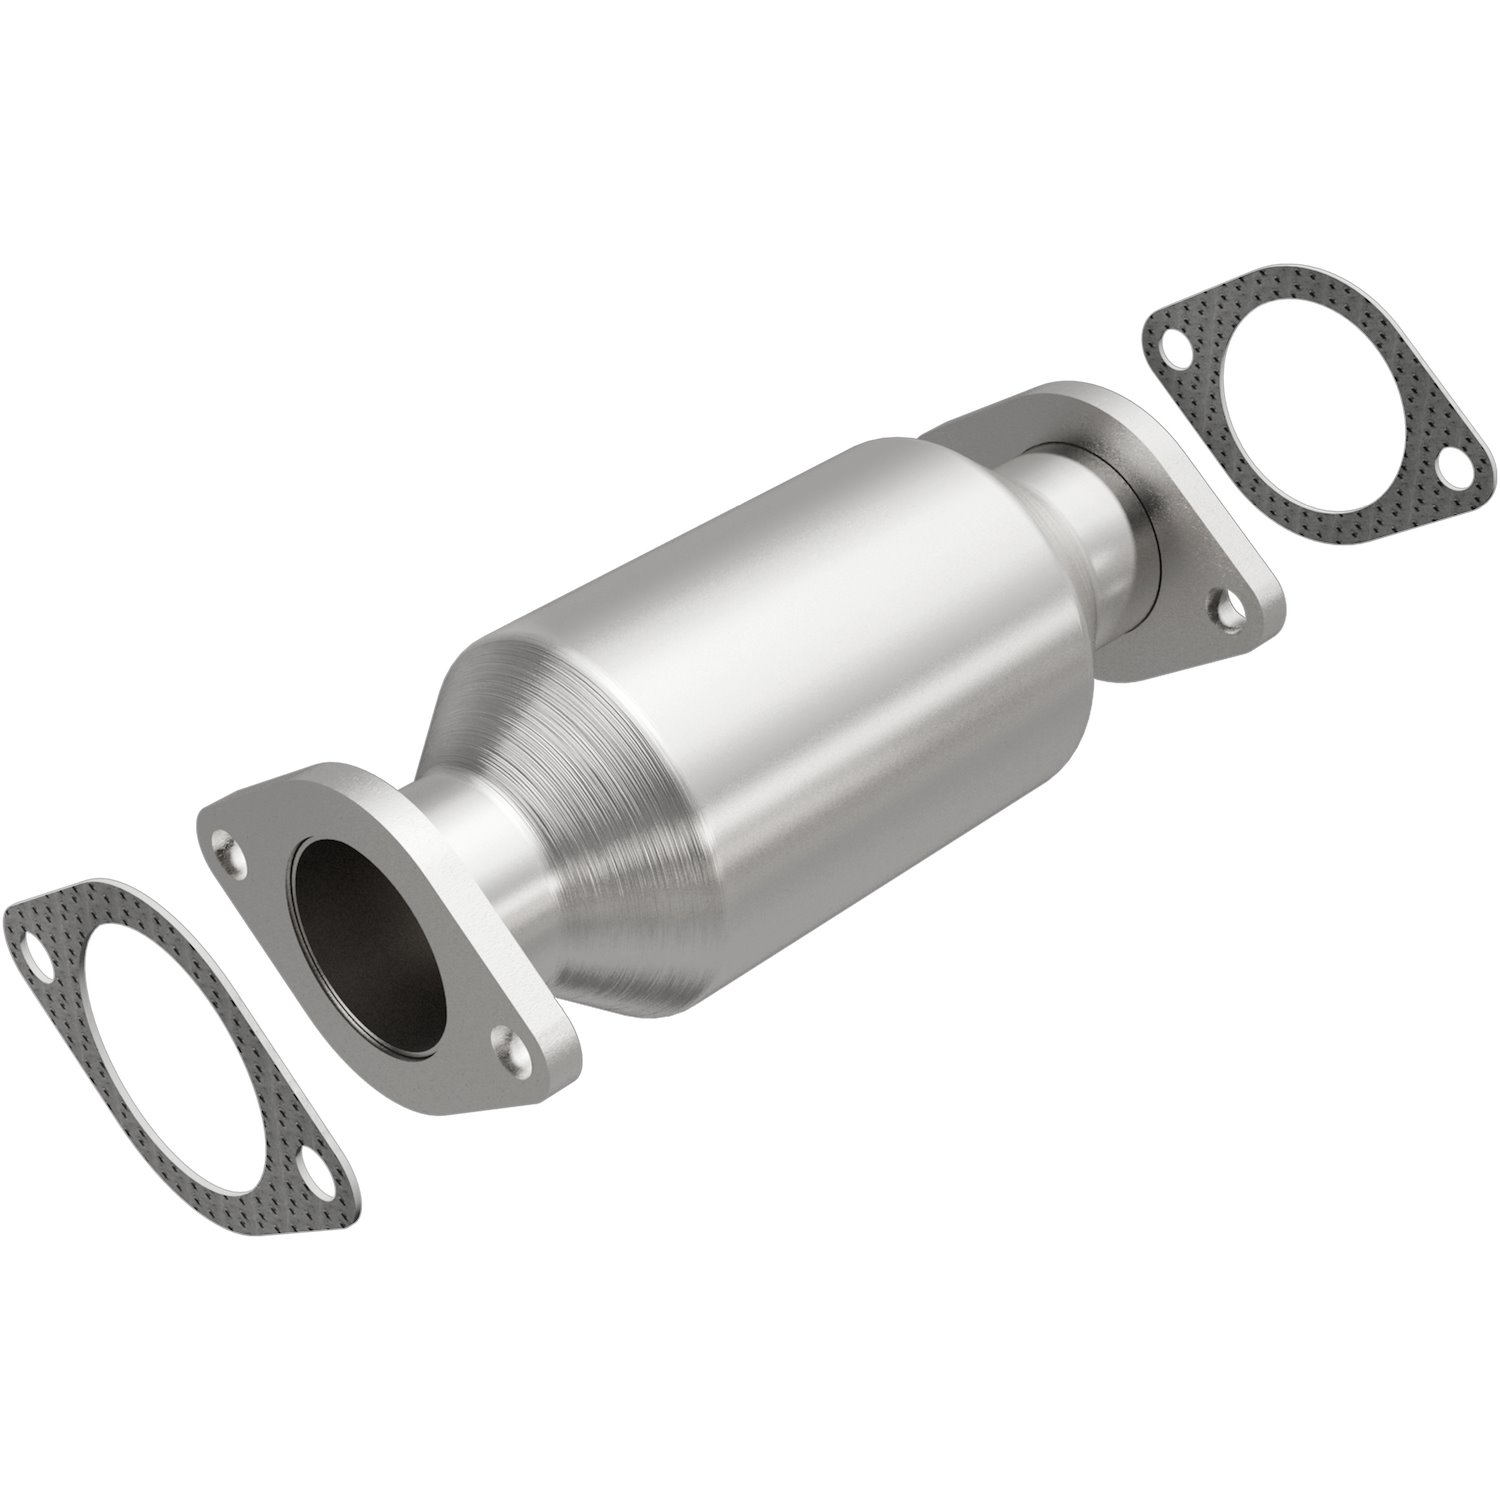 OEM Grade Federal / EPA Compliant Direct-Fit Catalytic Converter 51708